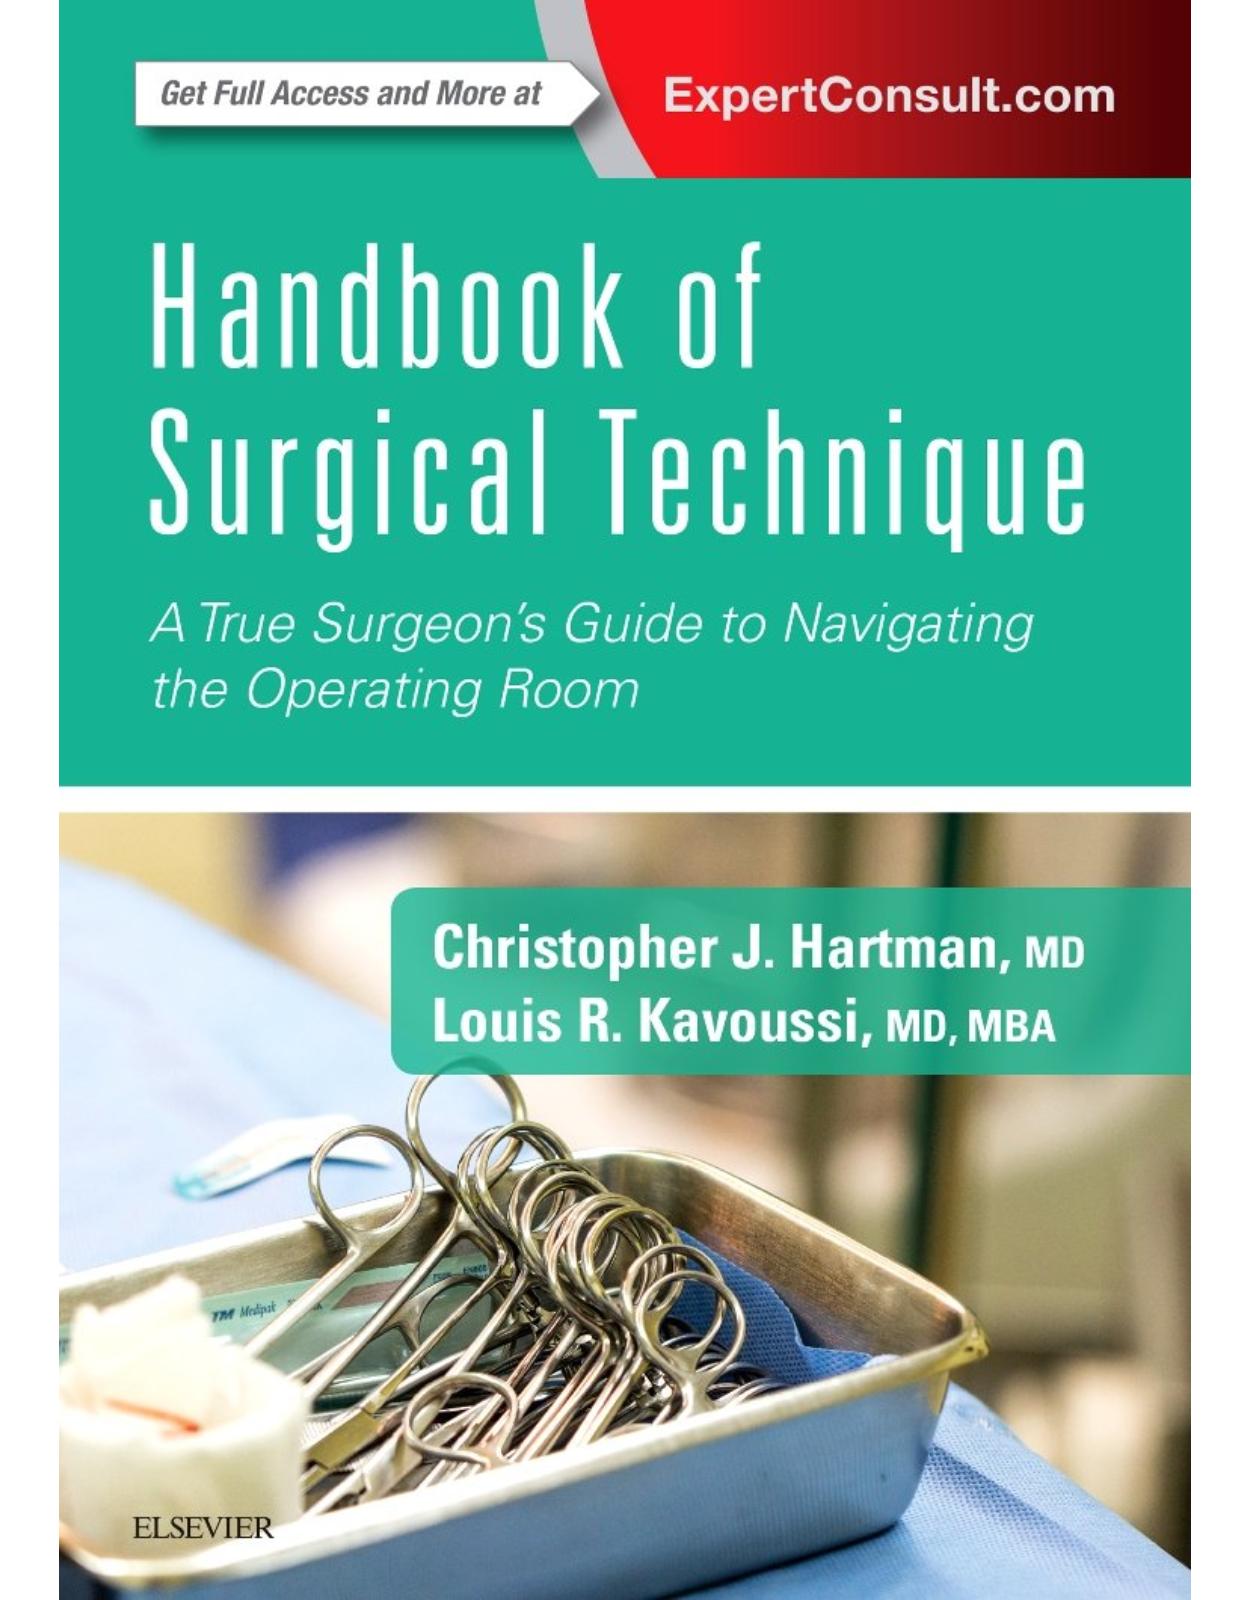 Handbook of Surgical Technique: A True Surgeon's Guide to Navigating the Operating Room, 1e